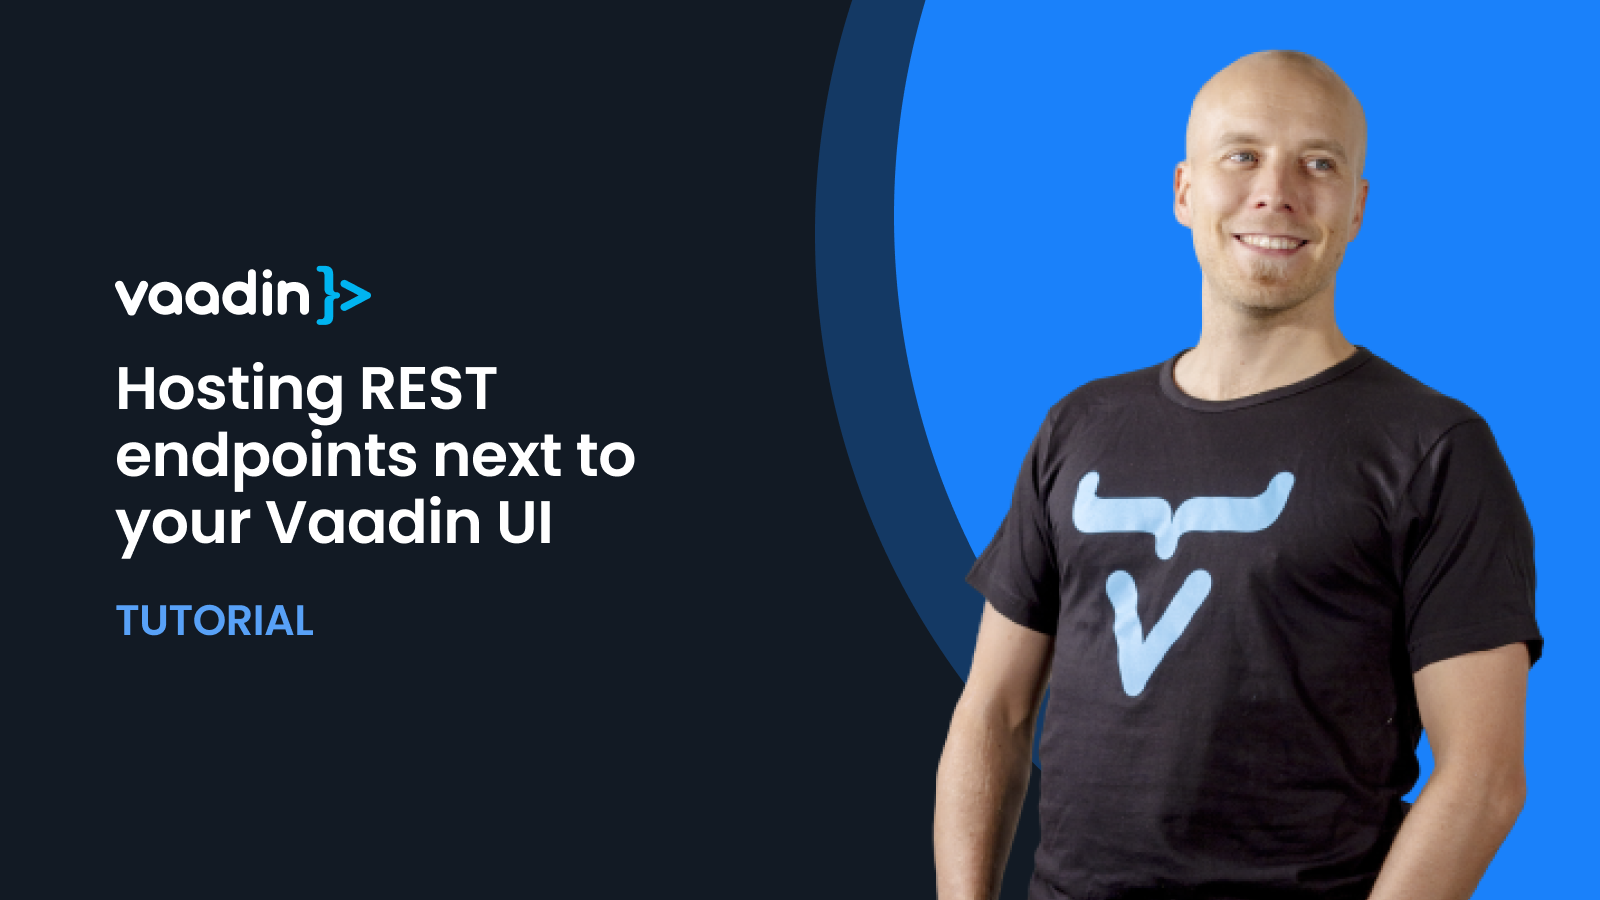 Learn how to host REST endpoints next to your Vaadin UI in this Vaadin tutorial.